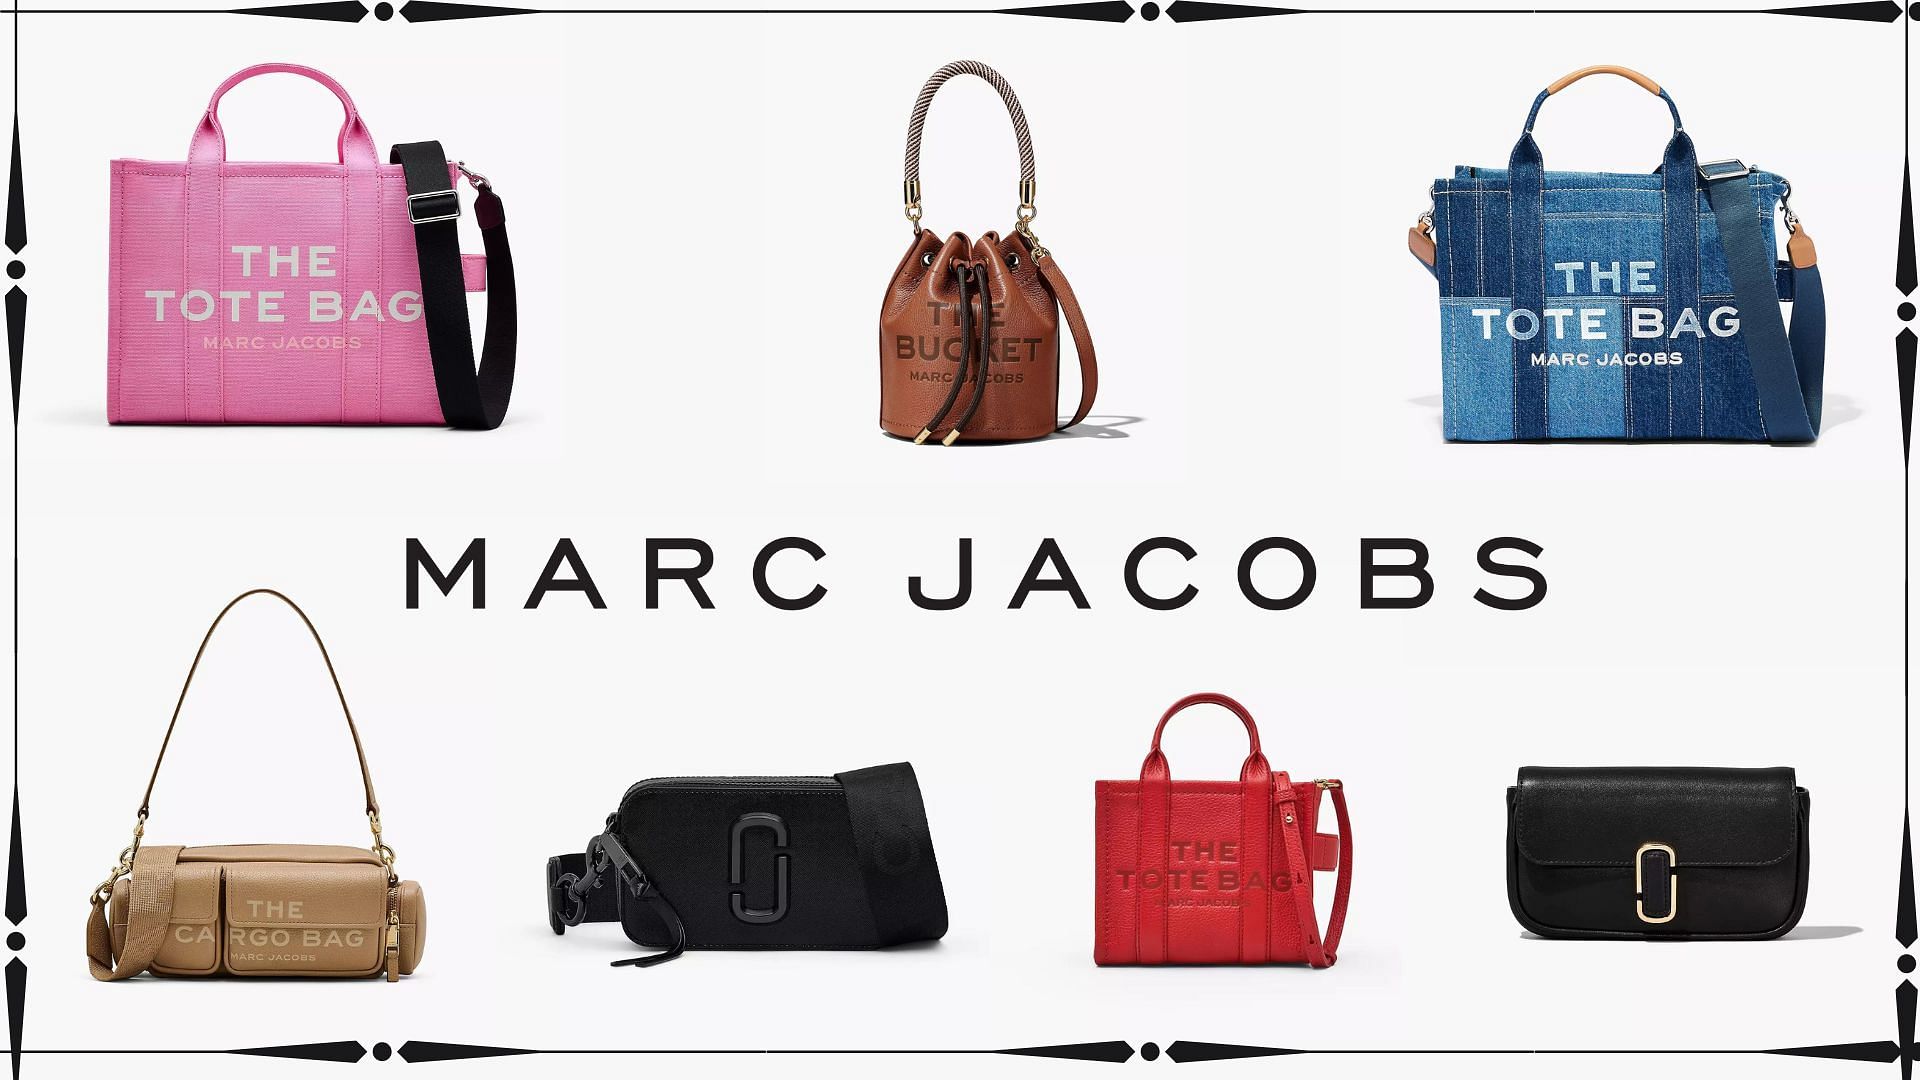 best marc jacobs bags: 7 Best Marc Jacobs bags to add into your collection